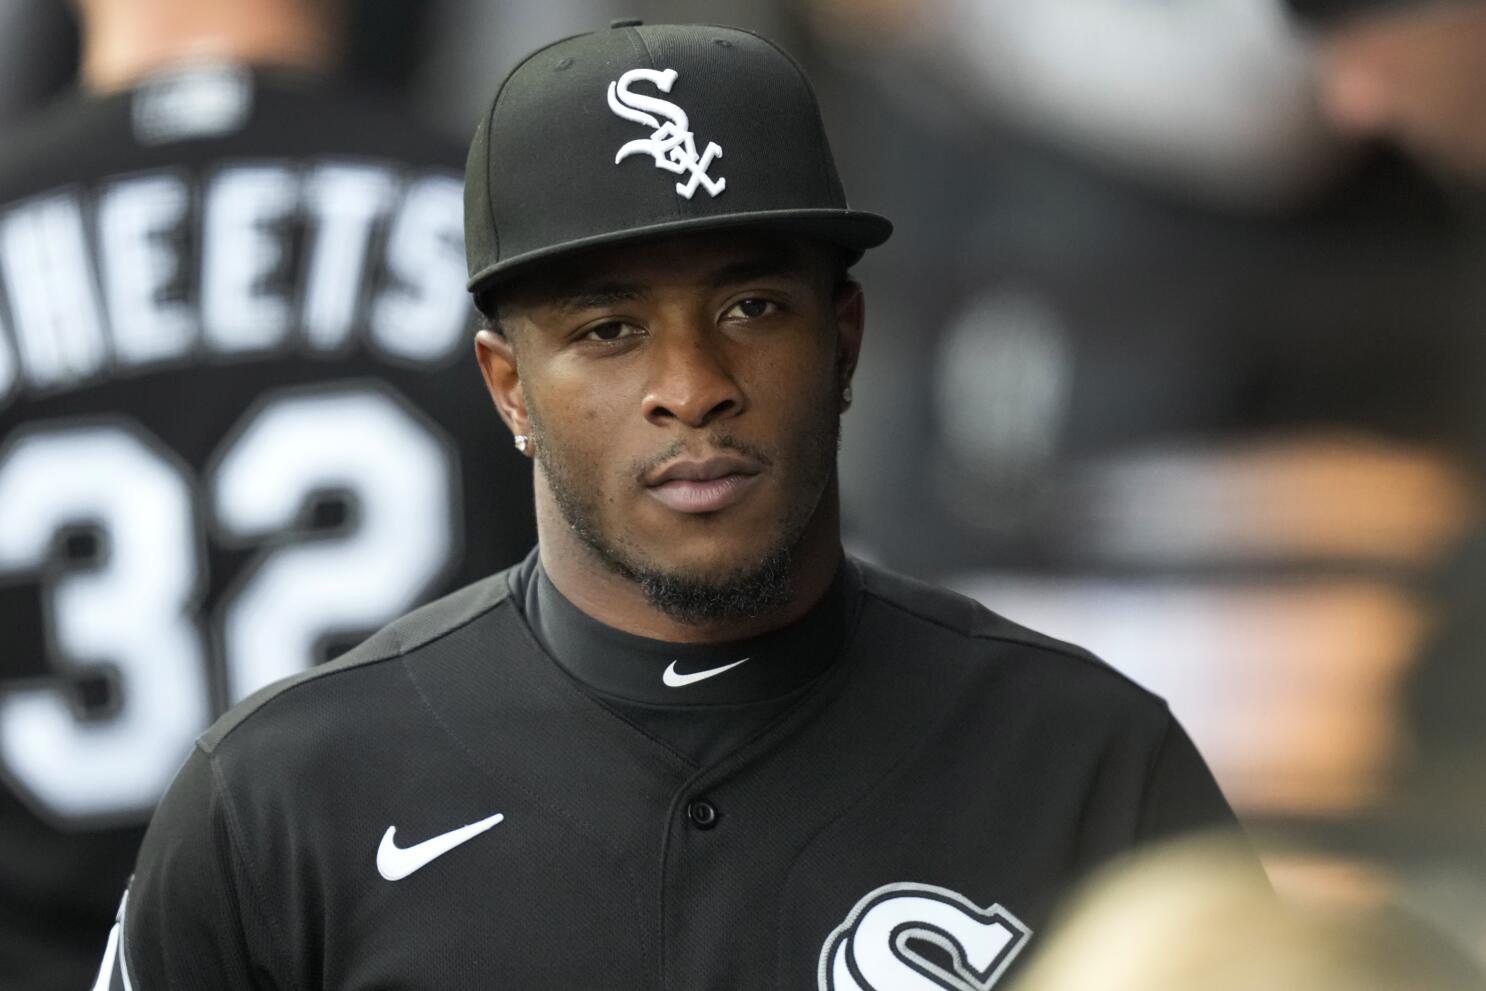 Tim Anderson Leaves Game as Chicago White Sox Win Opener vs Twins